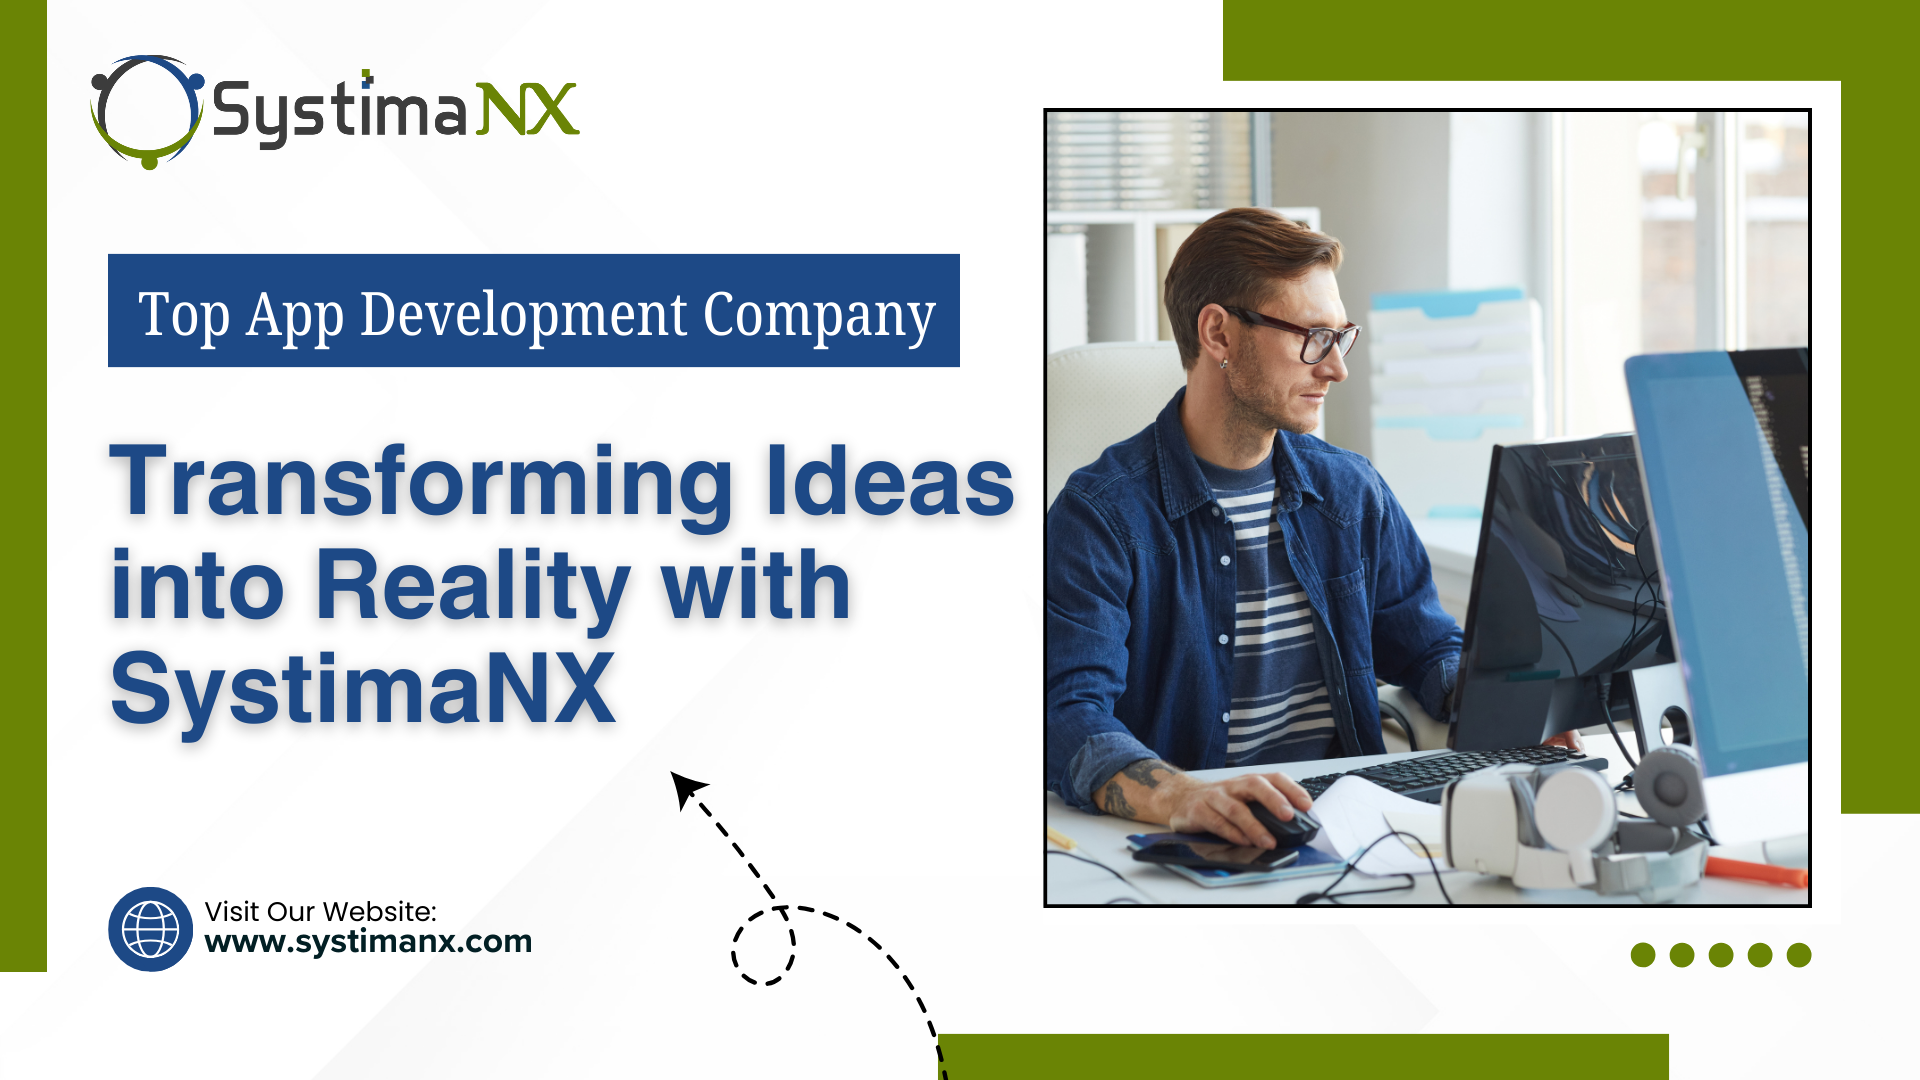 Top App Development Company: Transforming Ideas into Reality with SystimanX